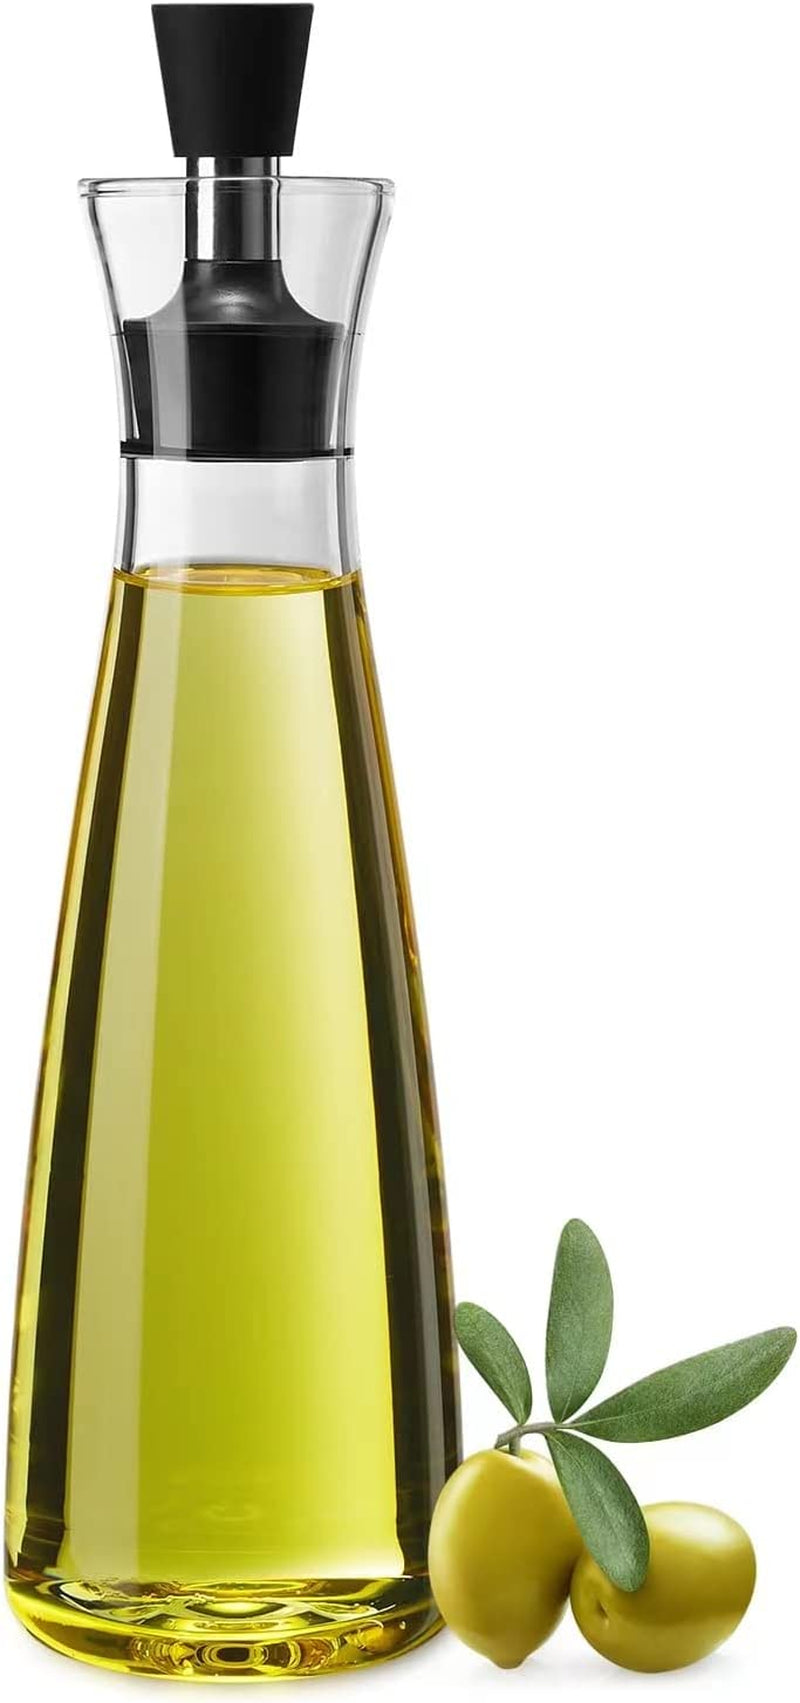 DHAEE 18 Ounce Glass Olive Oil Dispenser Bottle for Kitchen with Sealing Cap,Cooking Oil and Vinegar Bottle Set,No Funnel Needed,Clear & Easy to Clean- for Home Kitchen Decor Tools Accessories Home & Garden > Kitchen & Dining > Kitchen Tools & Utensils DHAEE Modern  